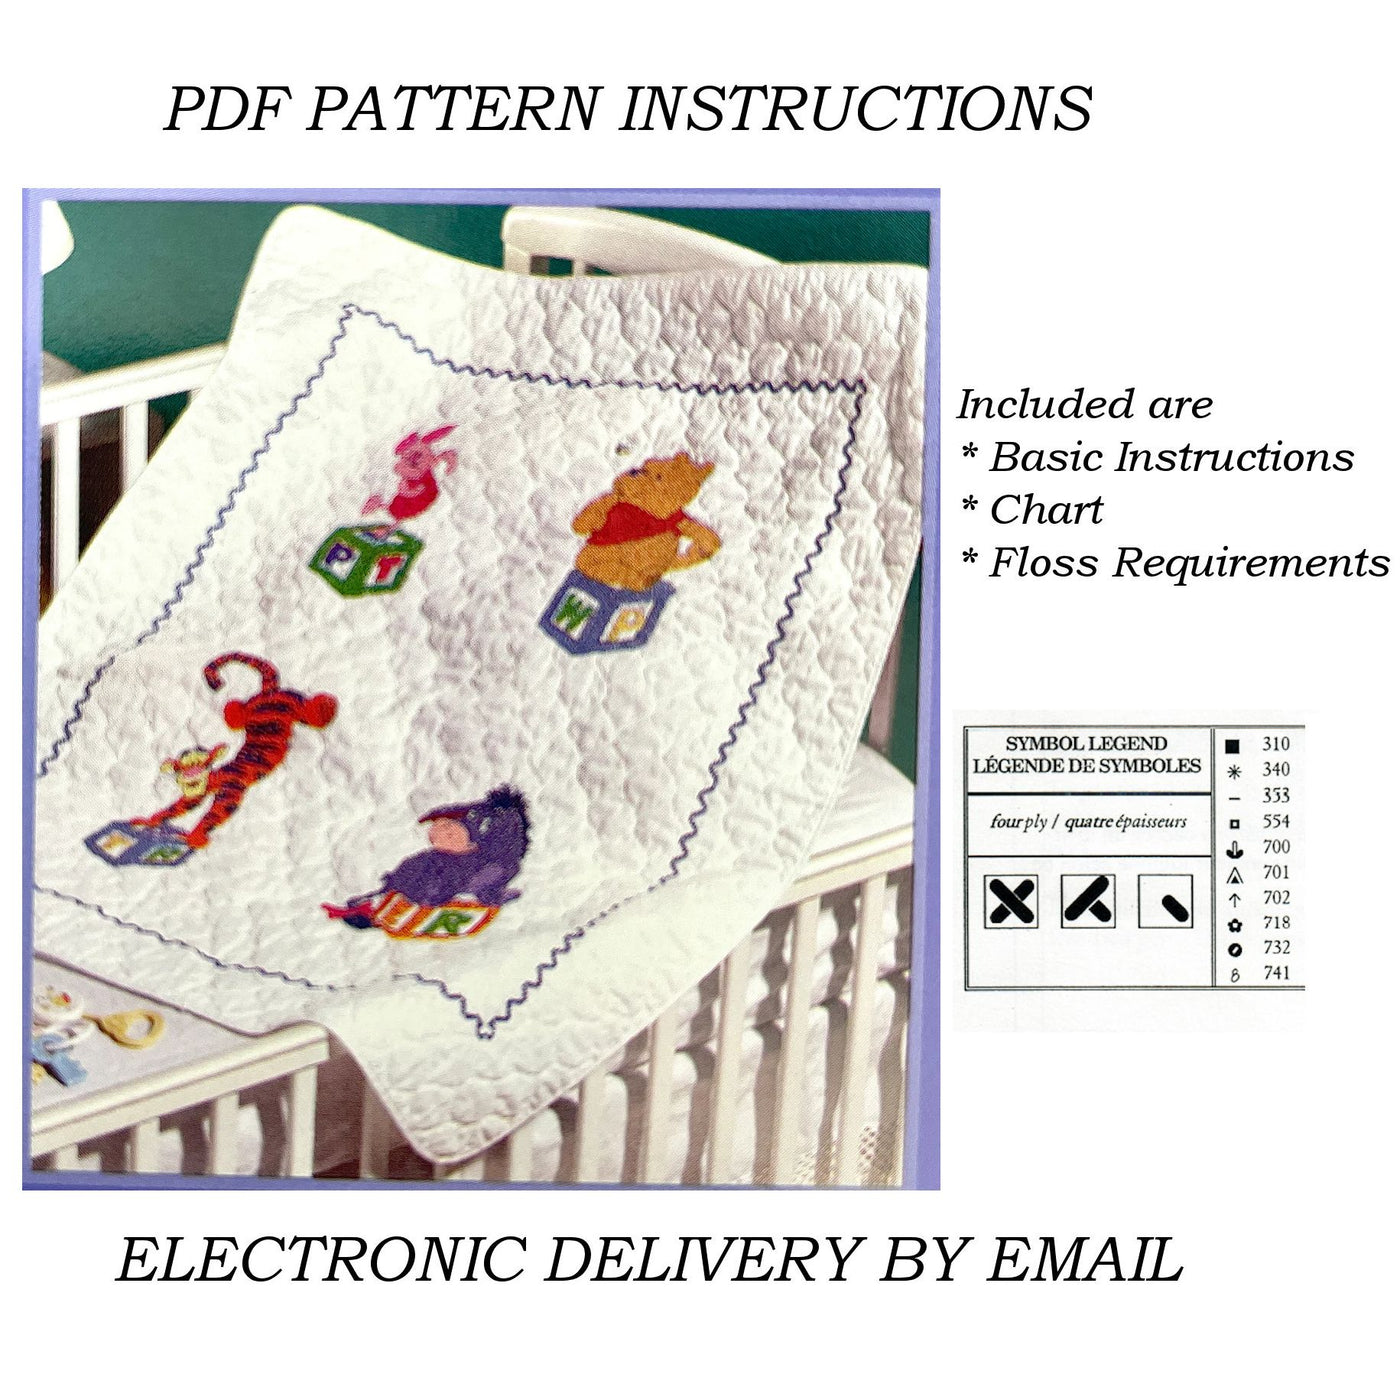 Disney Pooh's Block Party Quilt Stamped Cross Stitch Kit 1132-78